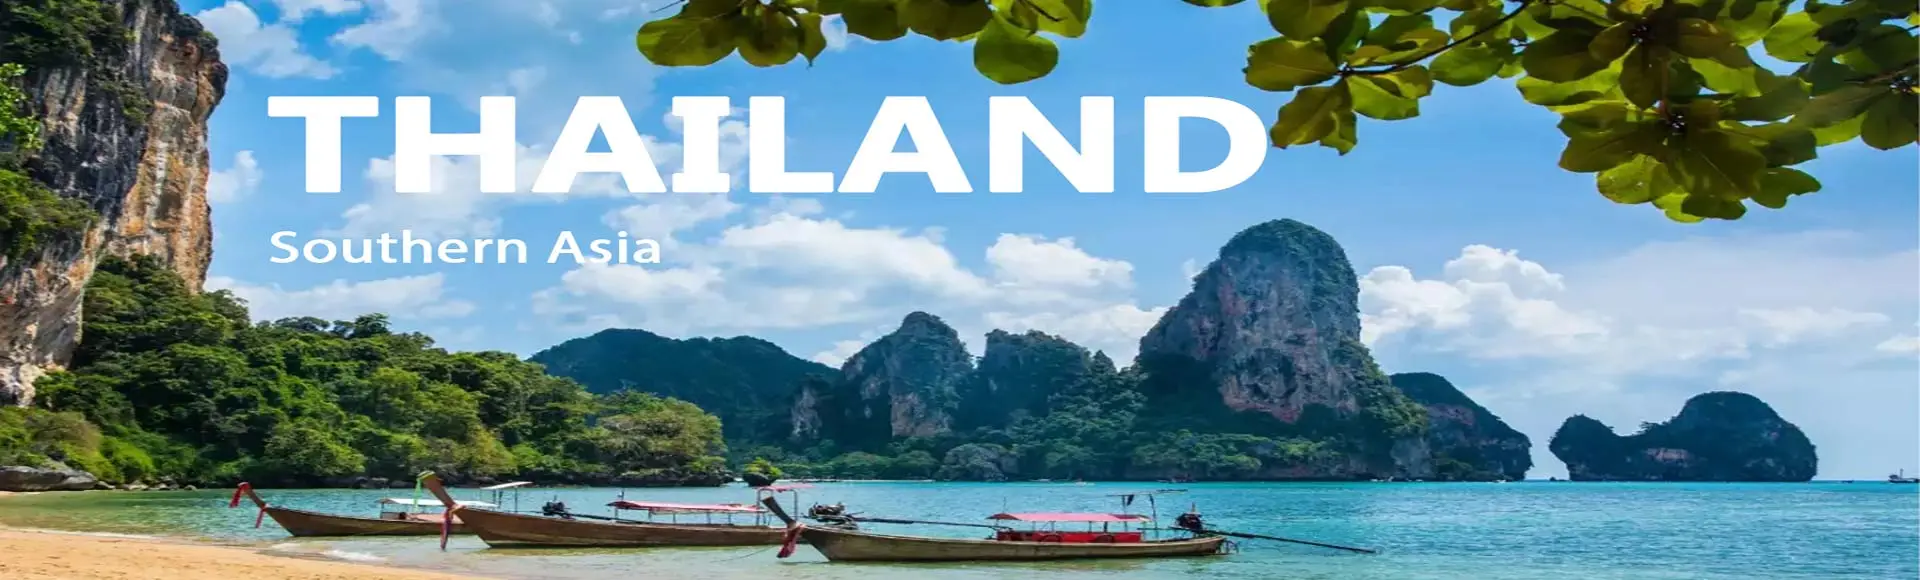 thailand tours holiday packages